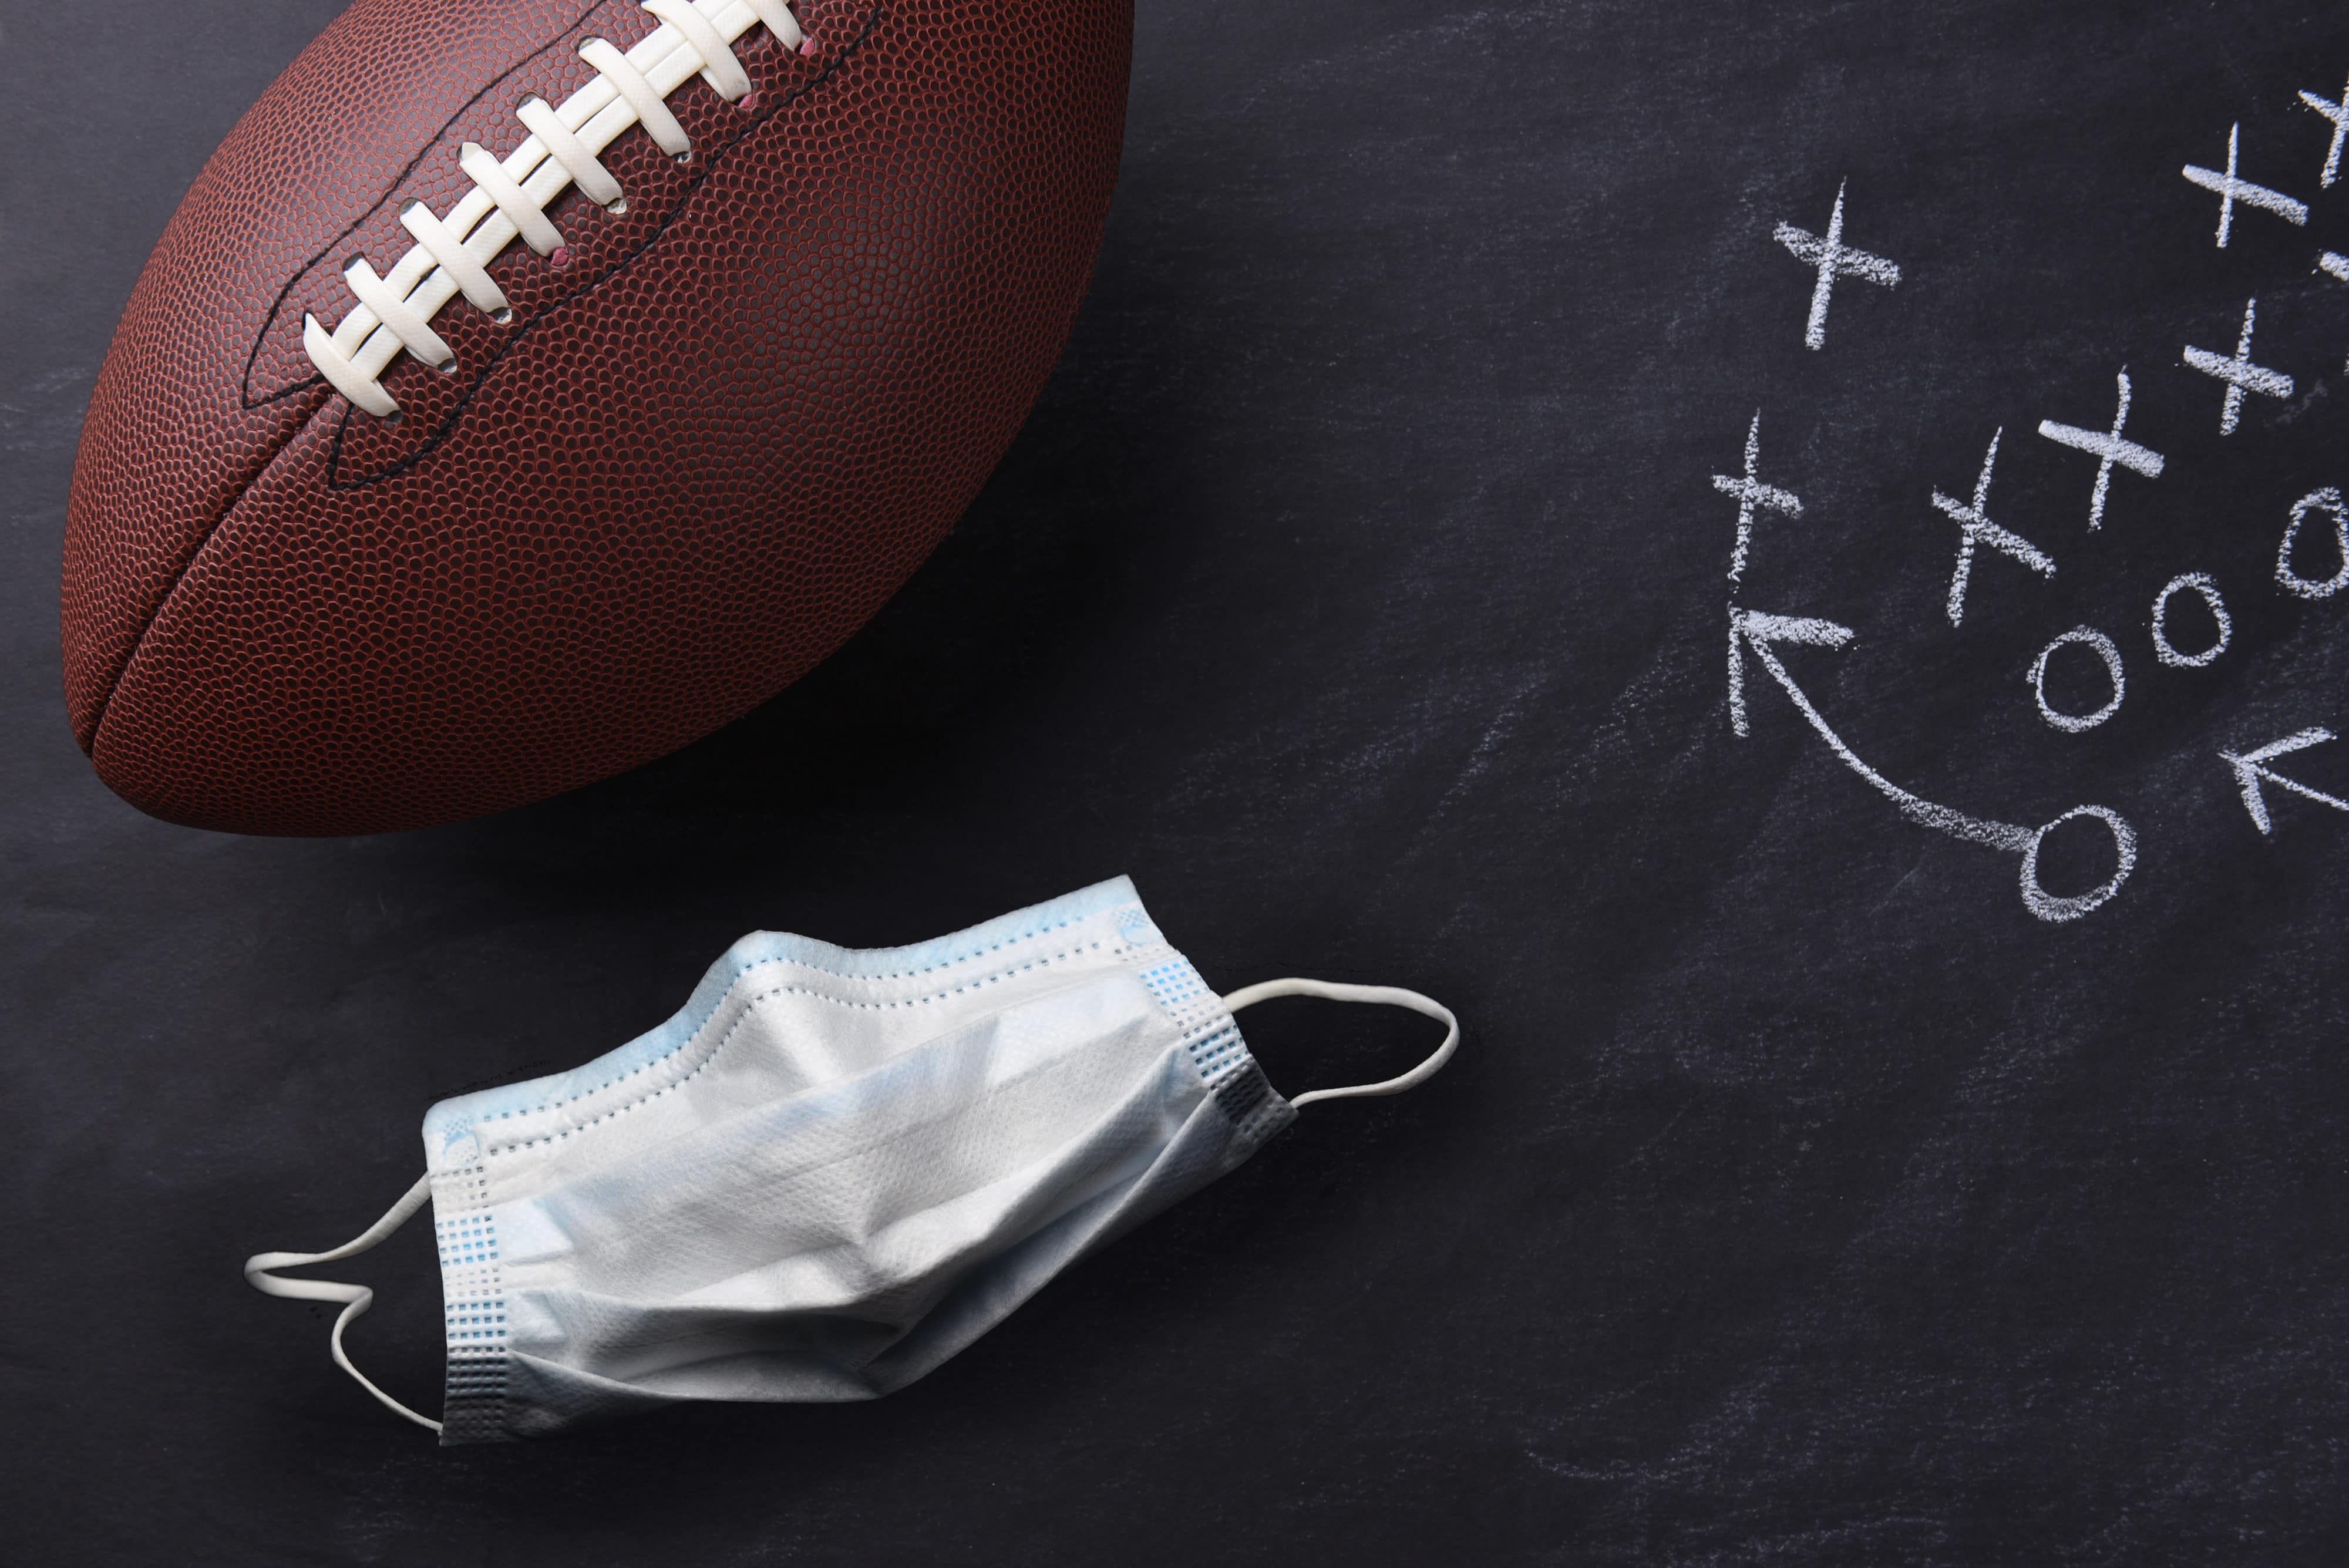 Covid-19 surgical mask and an American style football on a chalkboard with a play diagramed.